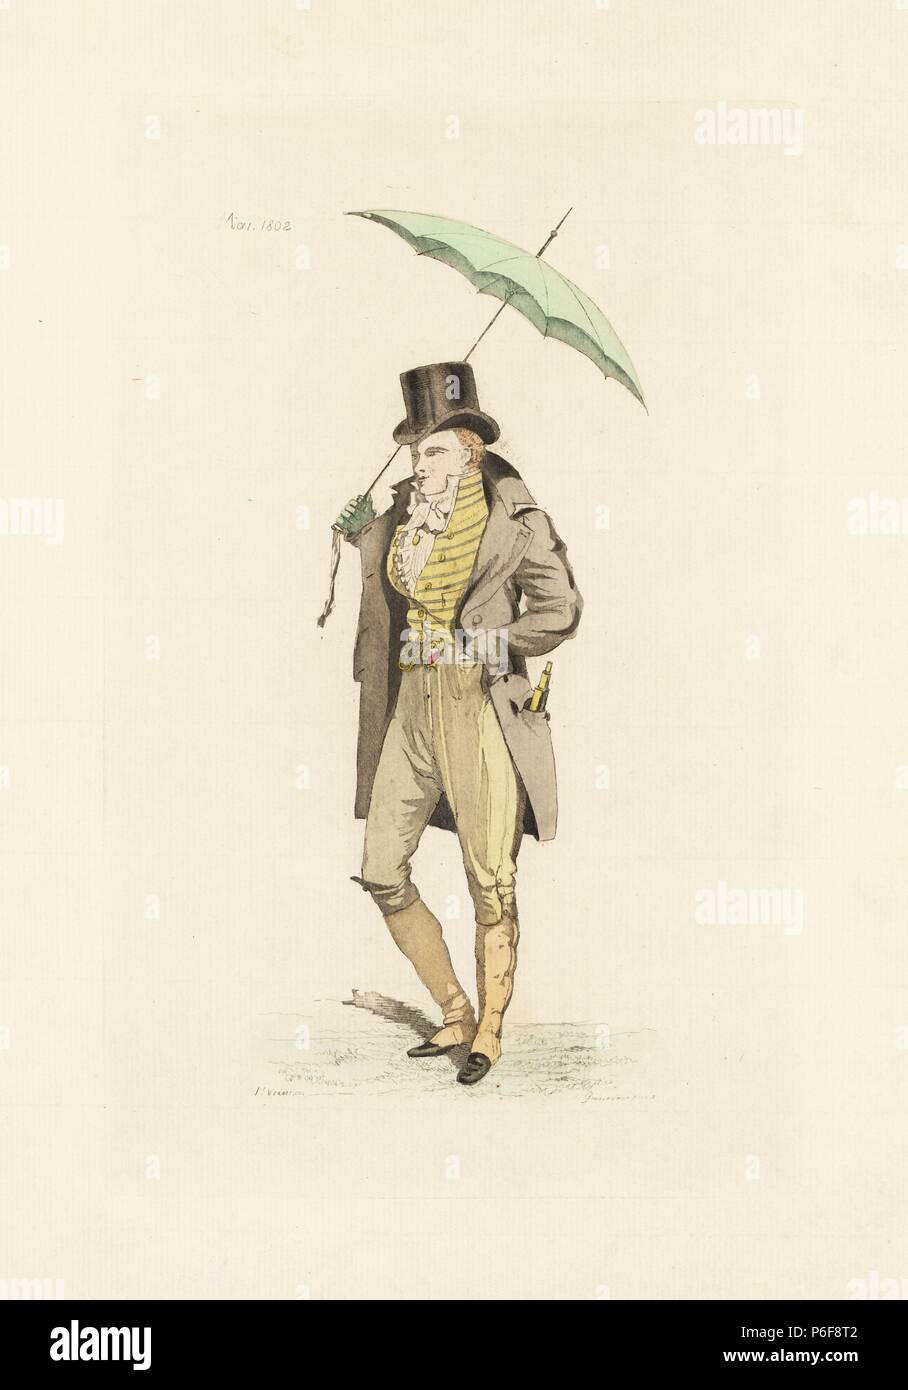 English man in the fashion of May 1802. He wears suede breeches and  gaiters, top hat, frock coat and waistcoat, and carries an umbrella cane.  Culottes et guetres de peau couleur de